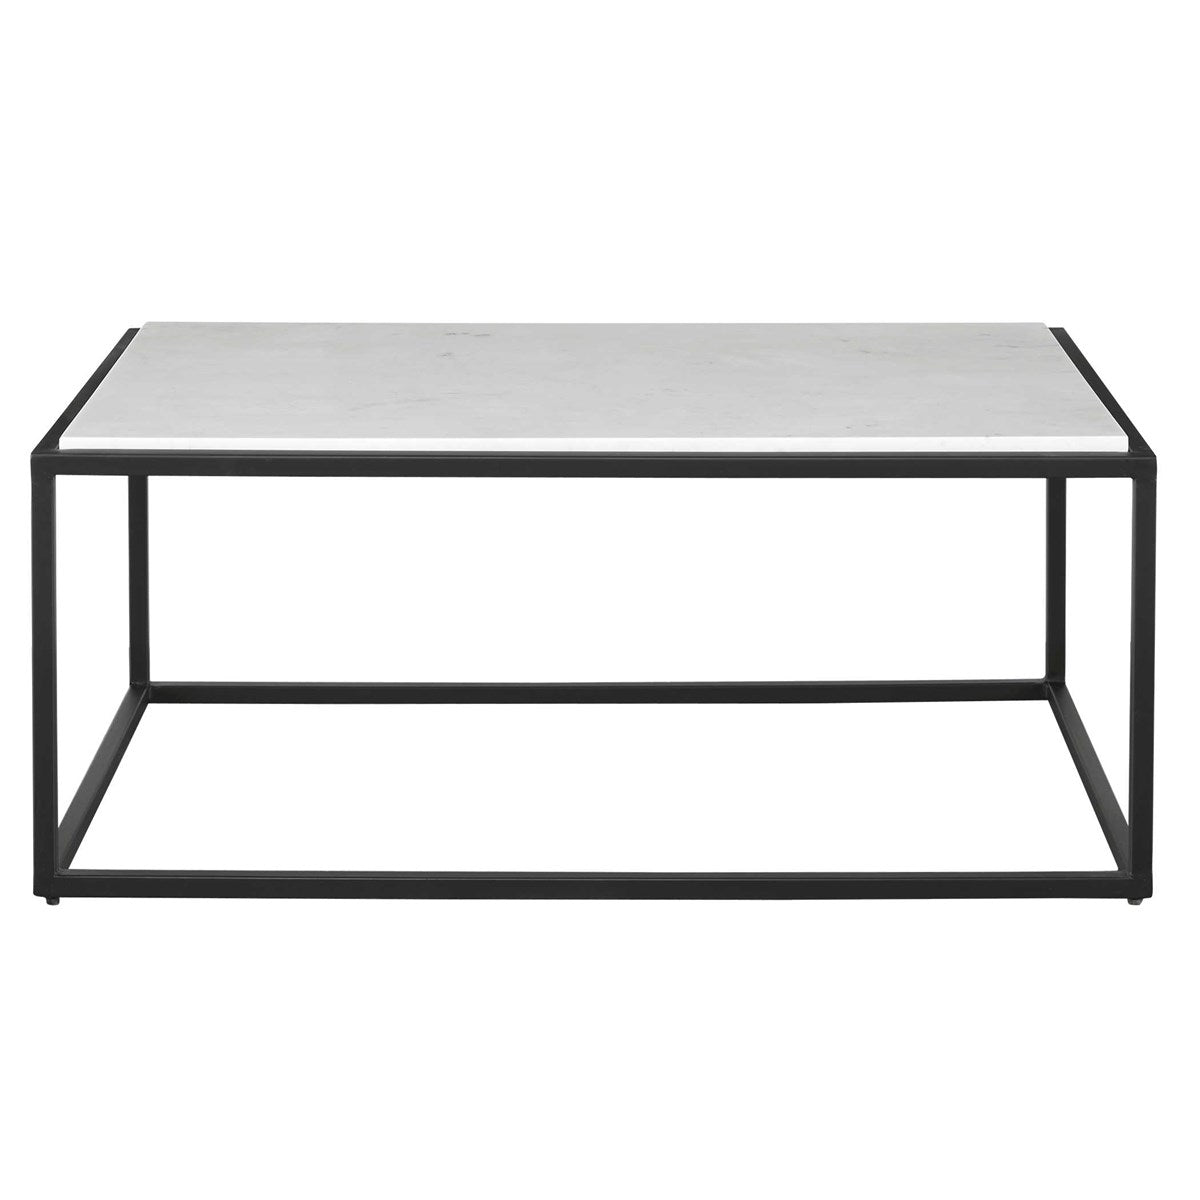 Vola Coffee Table White Marble Top